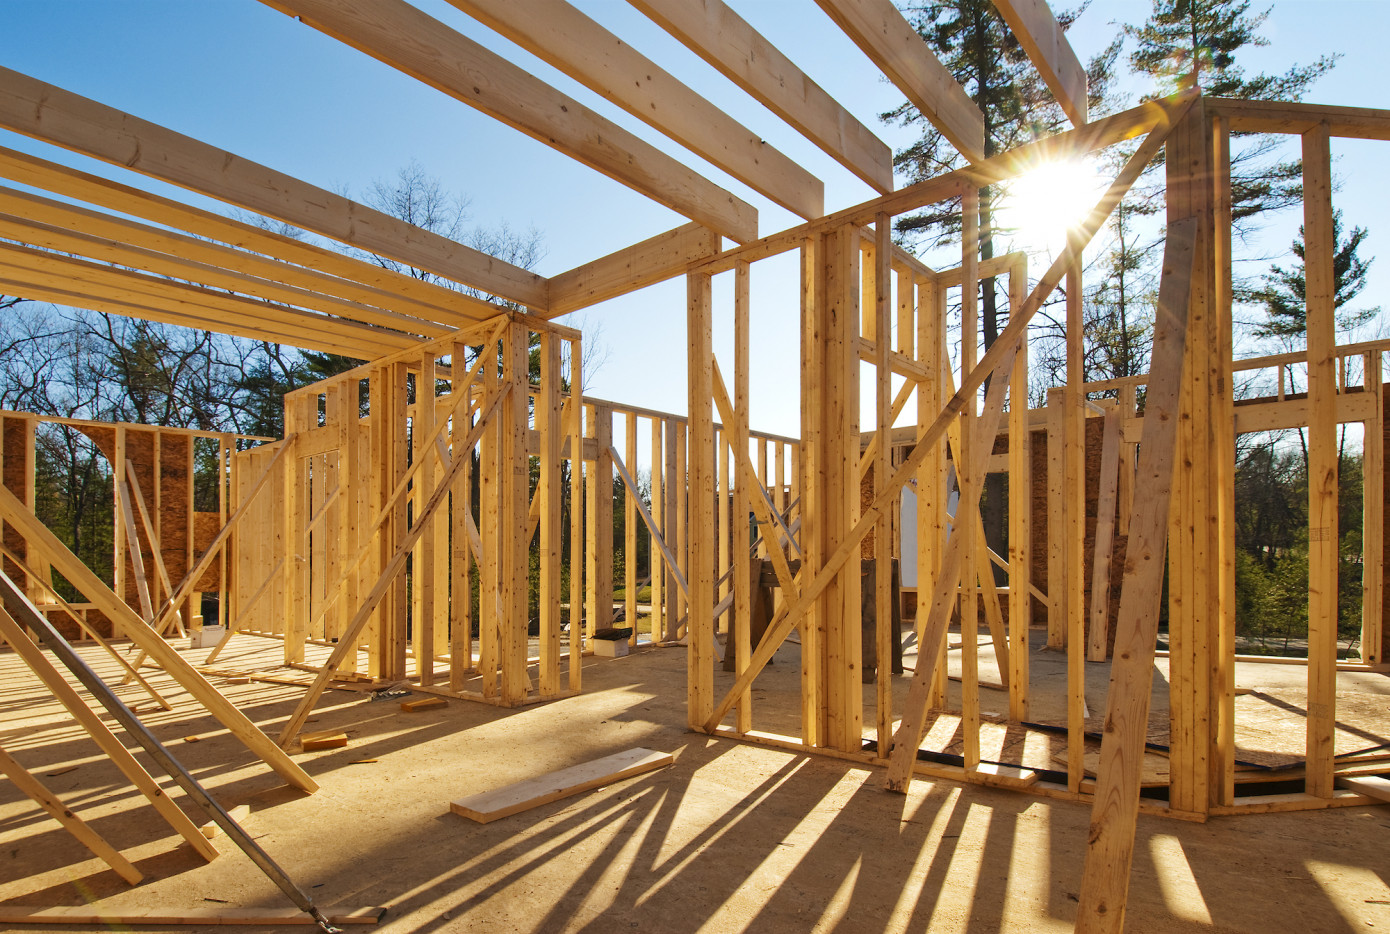 Madison’s Lumber Reporter: US house prices rose in 3Q 2019